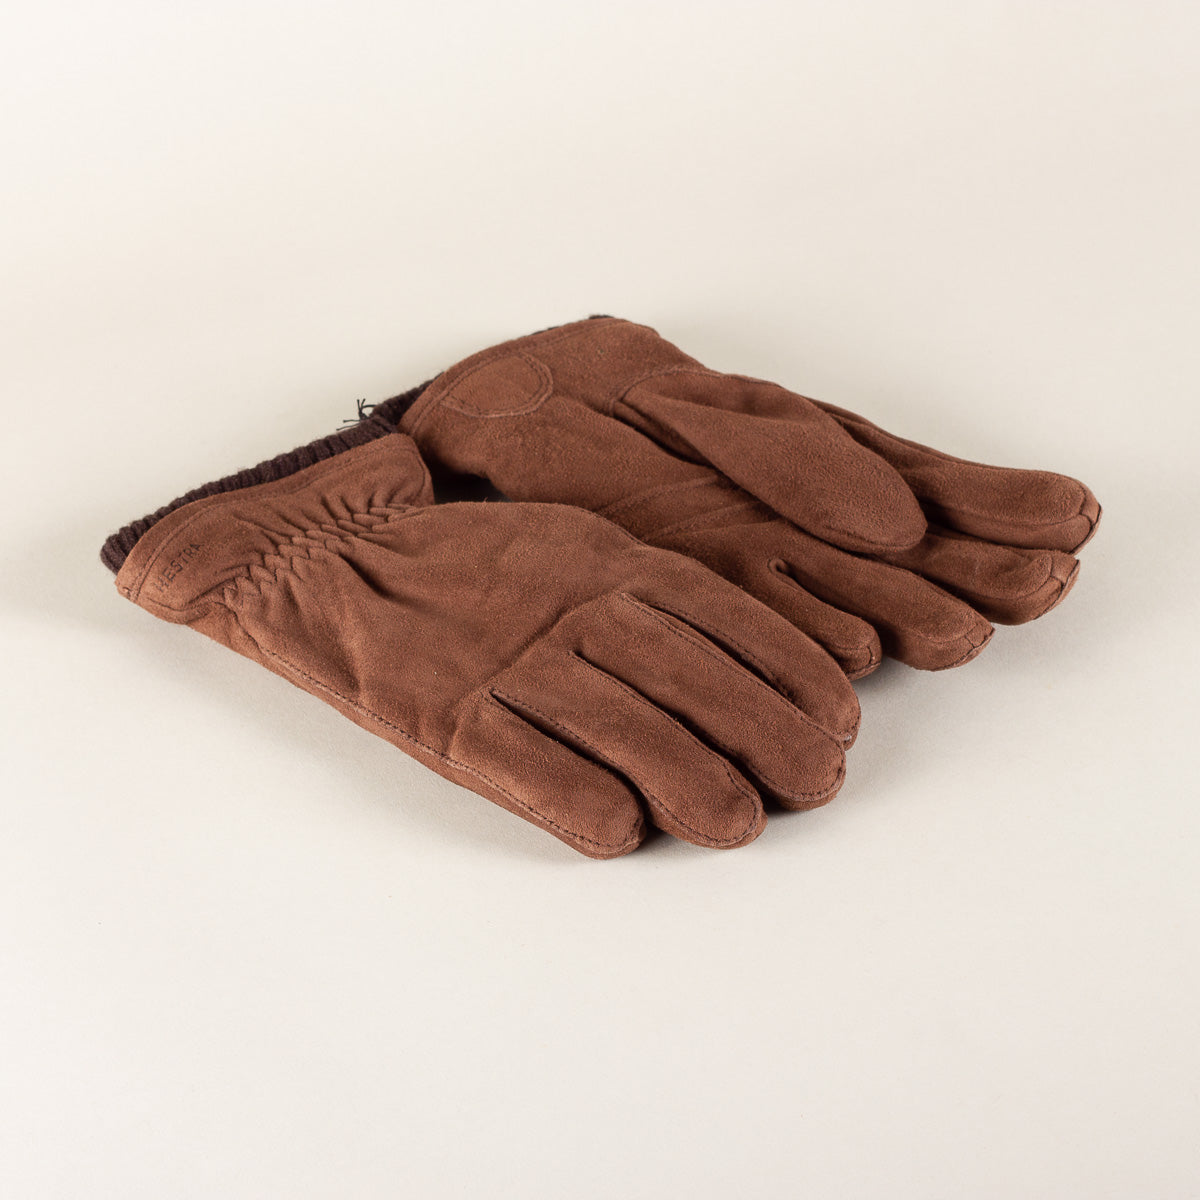 HESTRA Nathan suede leather gloves - marron